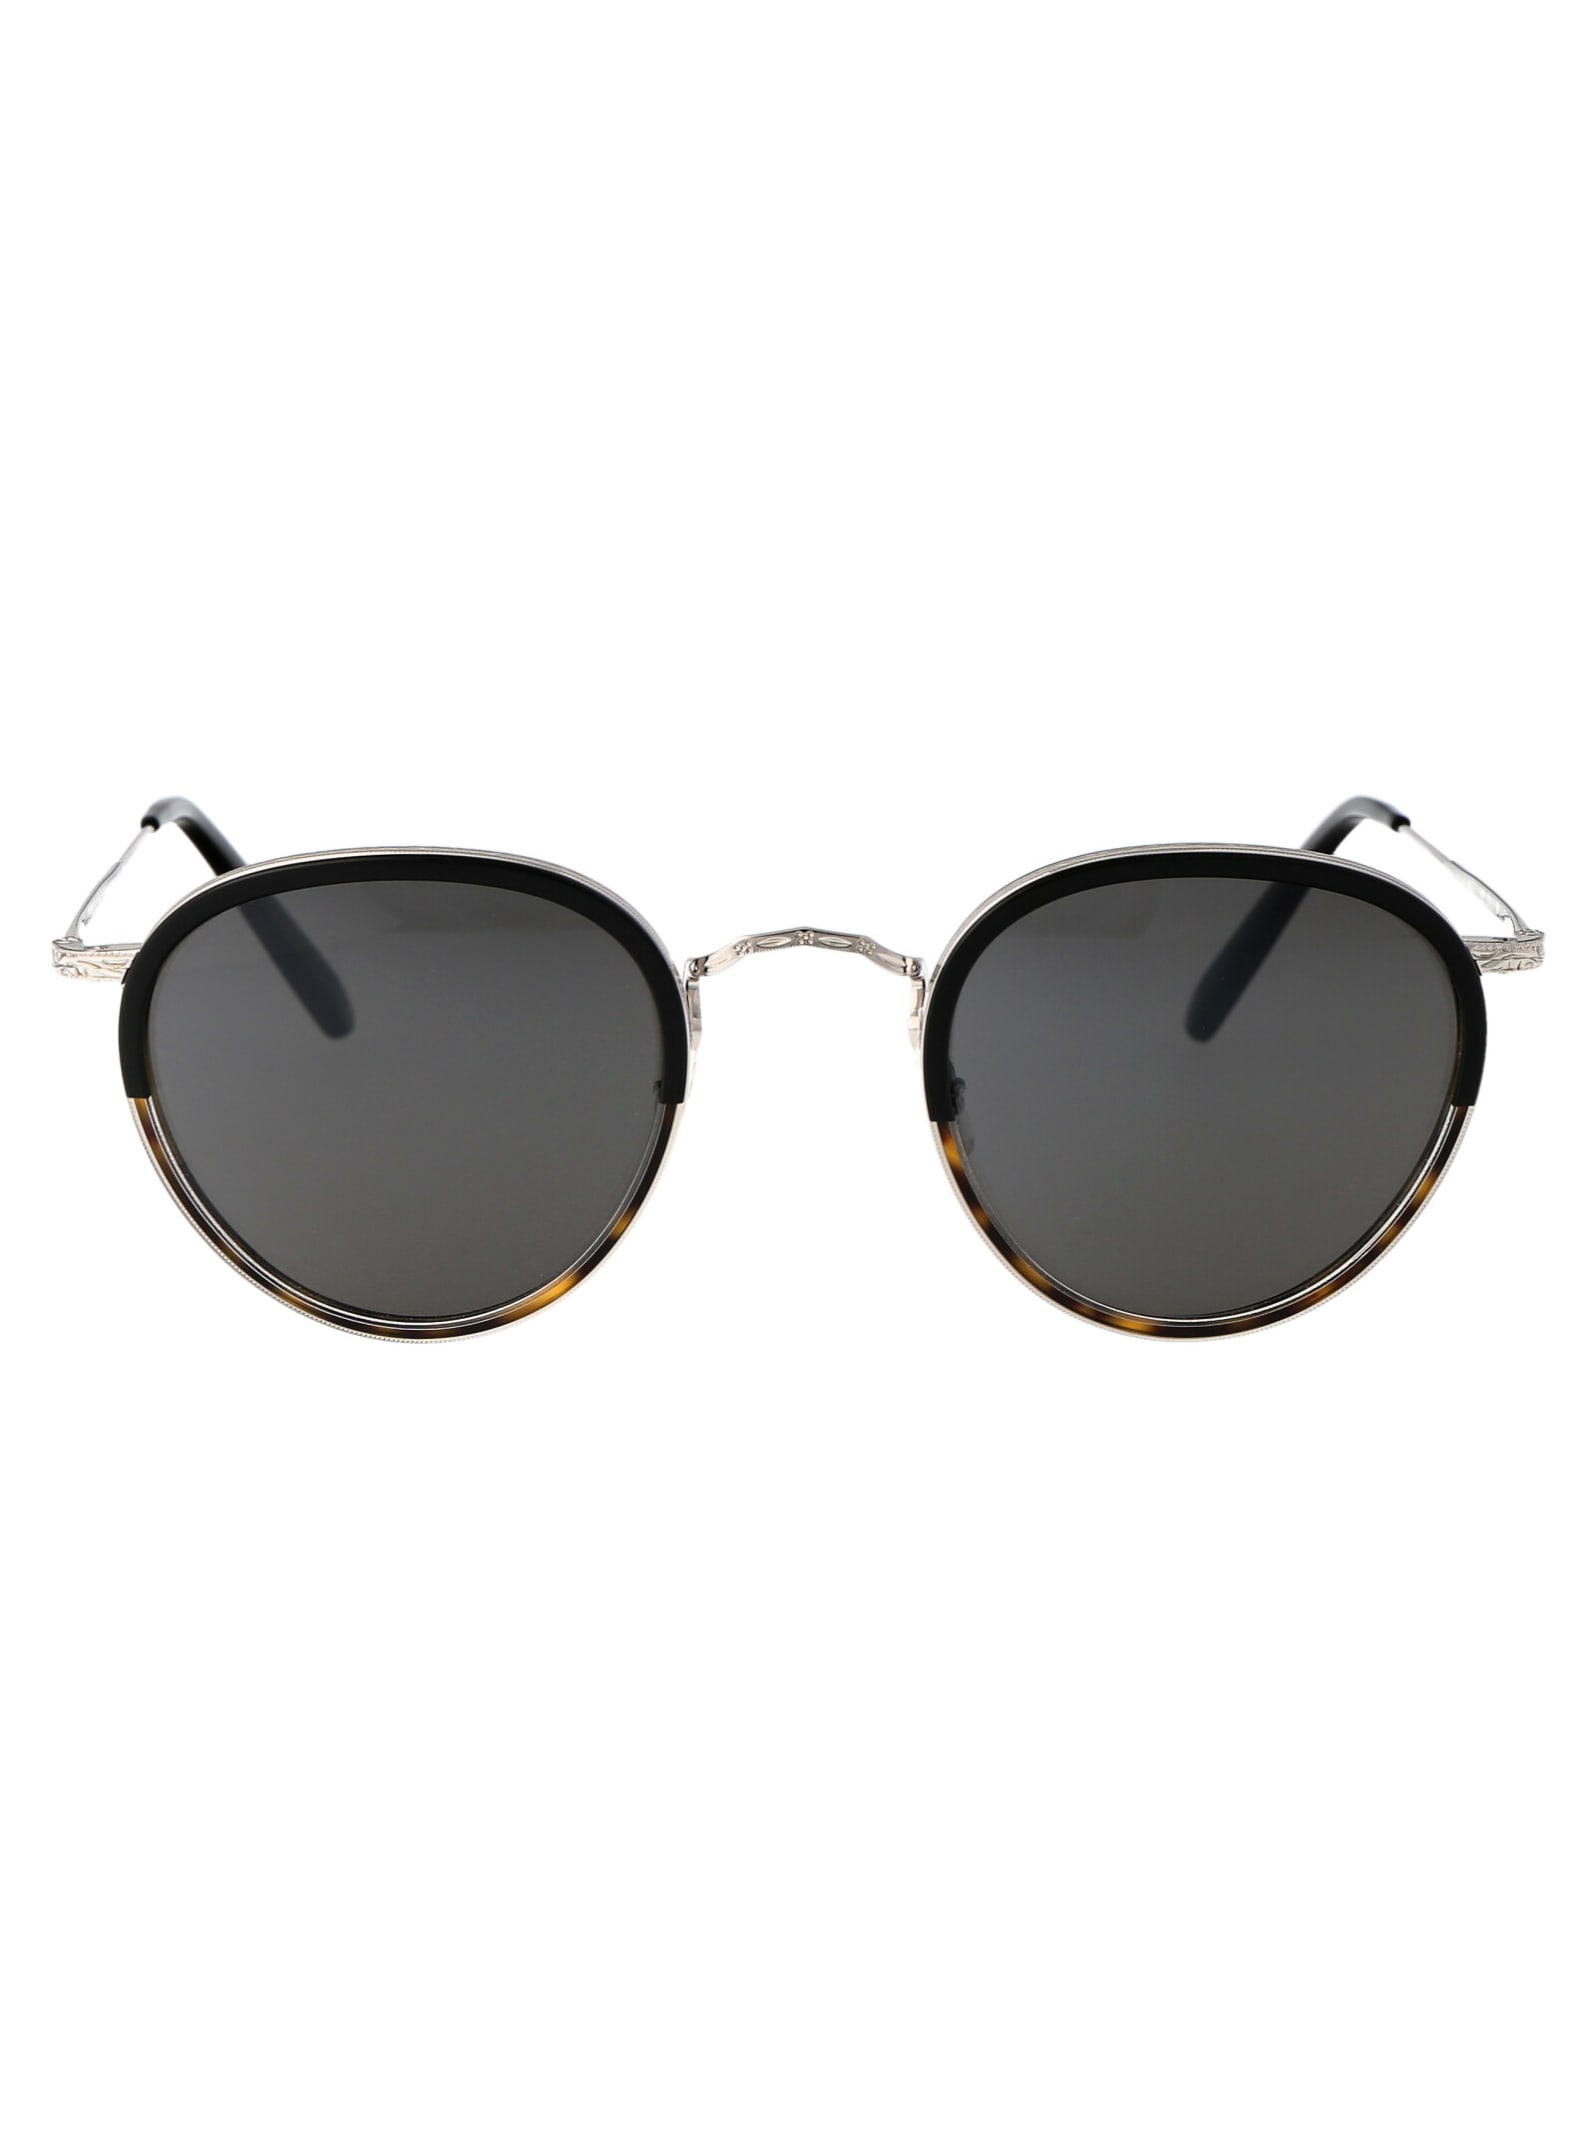 Shop Oliver Peoples Mp-2 Sun Sunglasses In 5036r5 Black/362 Gradient/silver